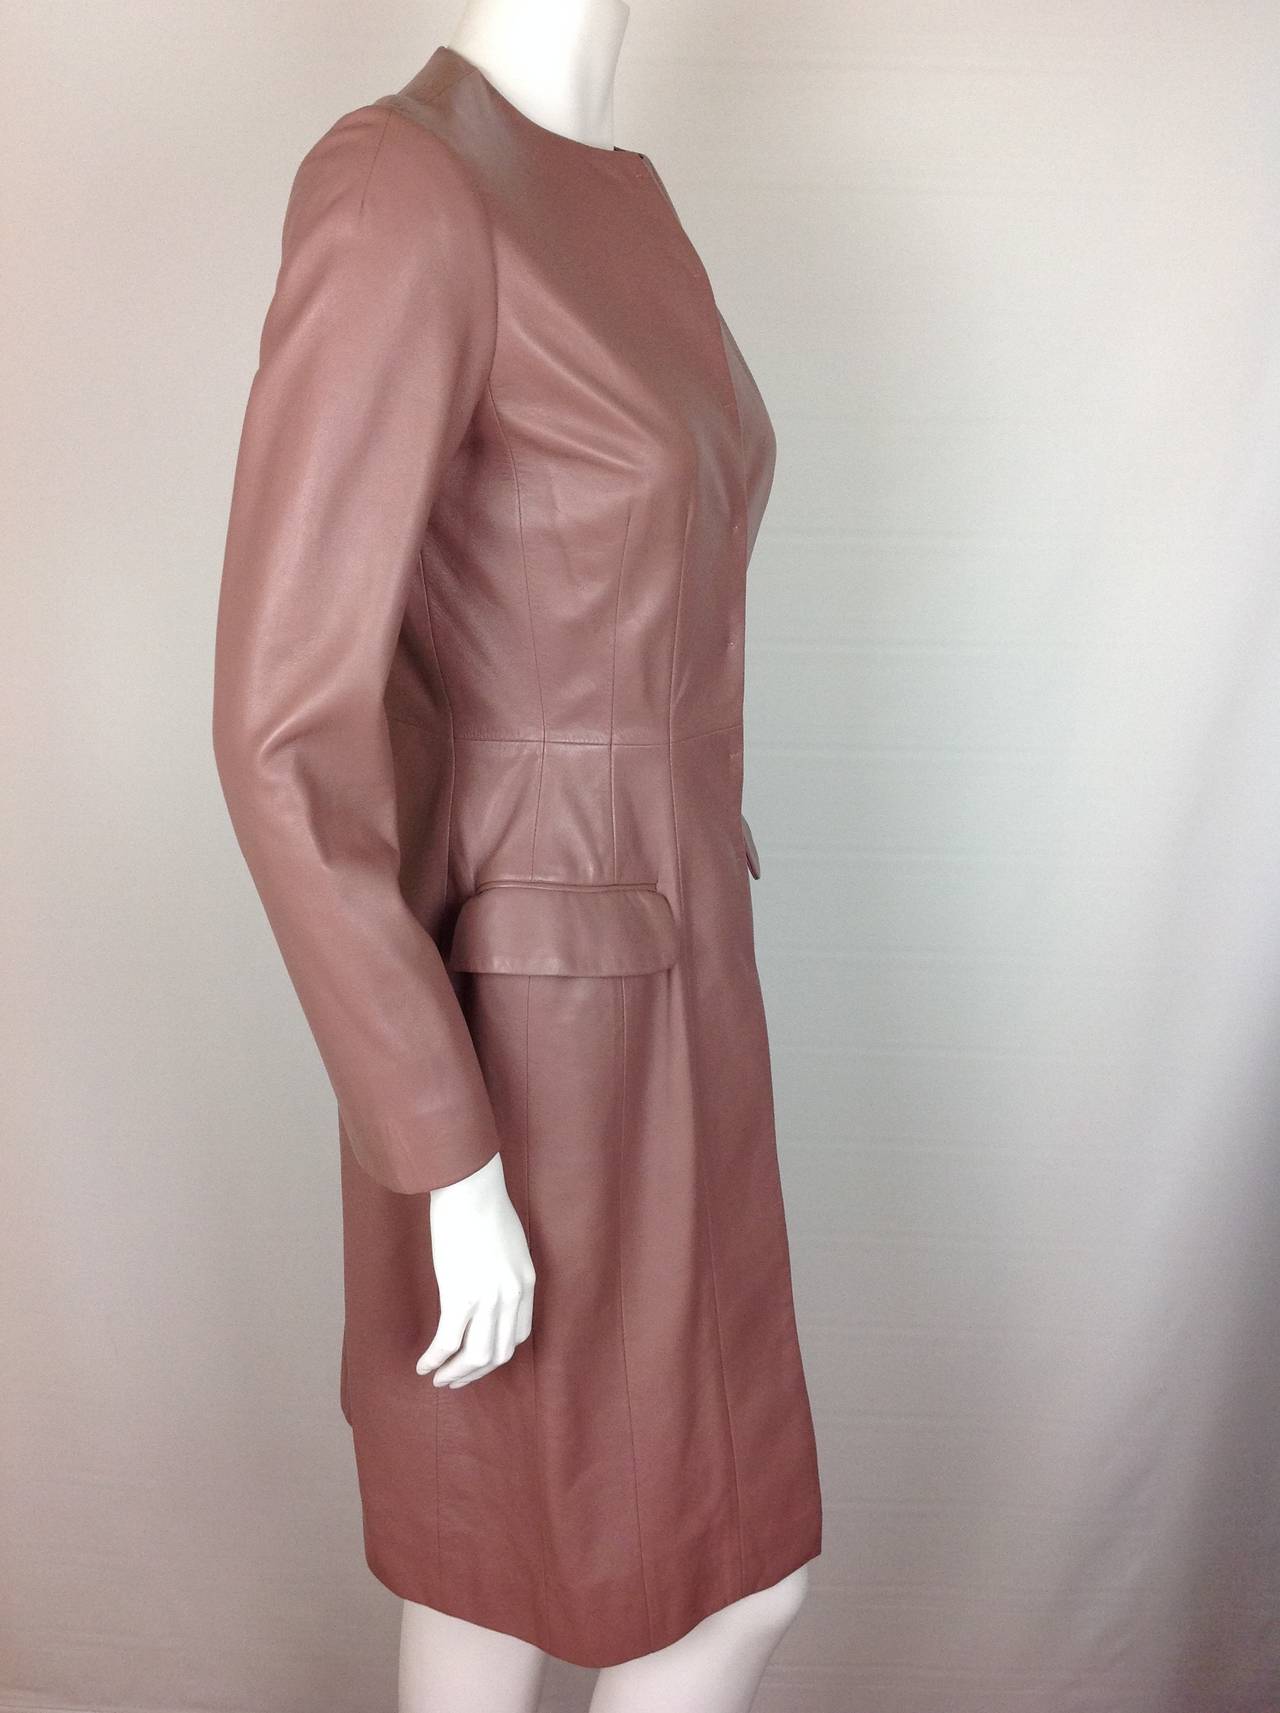 Soft as buttah...Christian Dior mauve lambskin coat/dress.
Beautifully fitted, with 8 hook and eye closures. 2 flap pockets.
Jewel neckline, 15